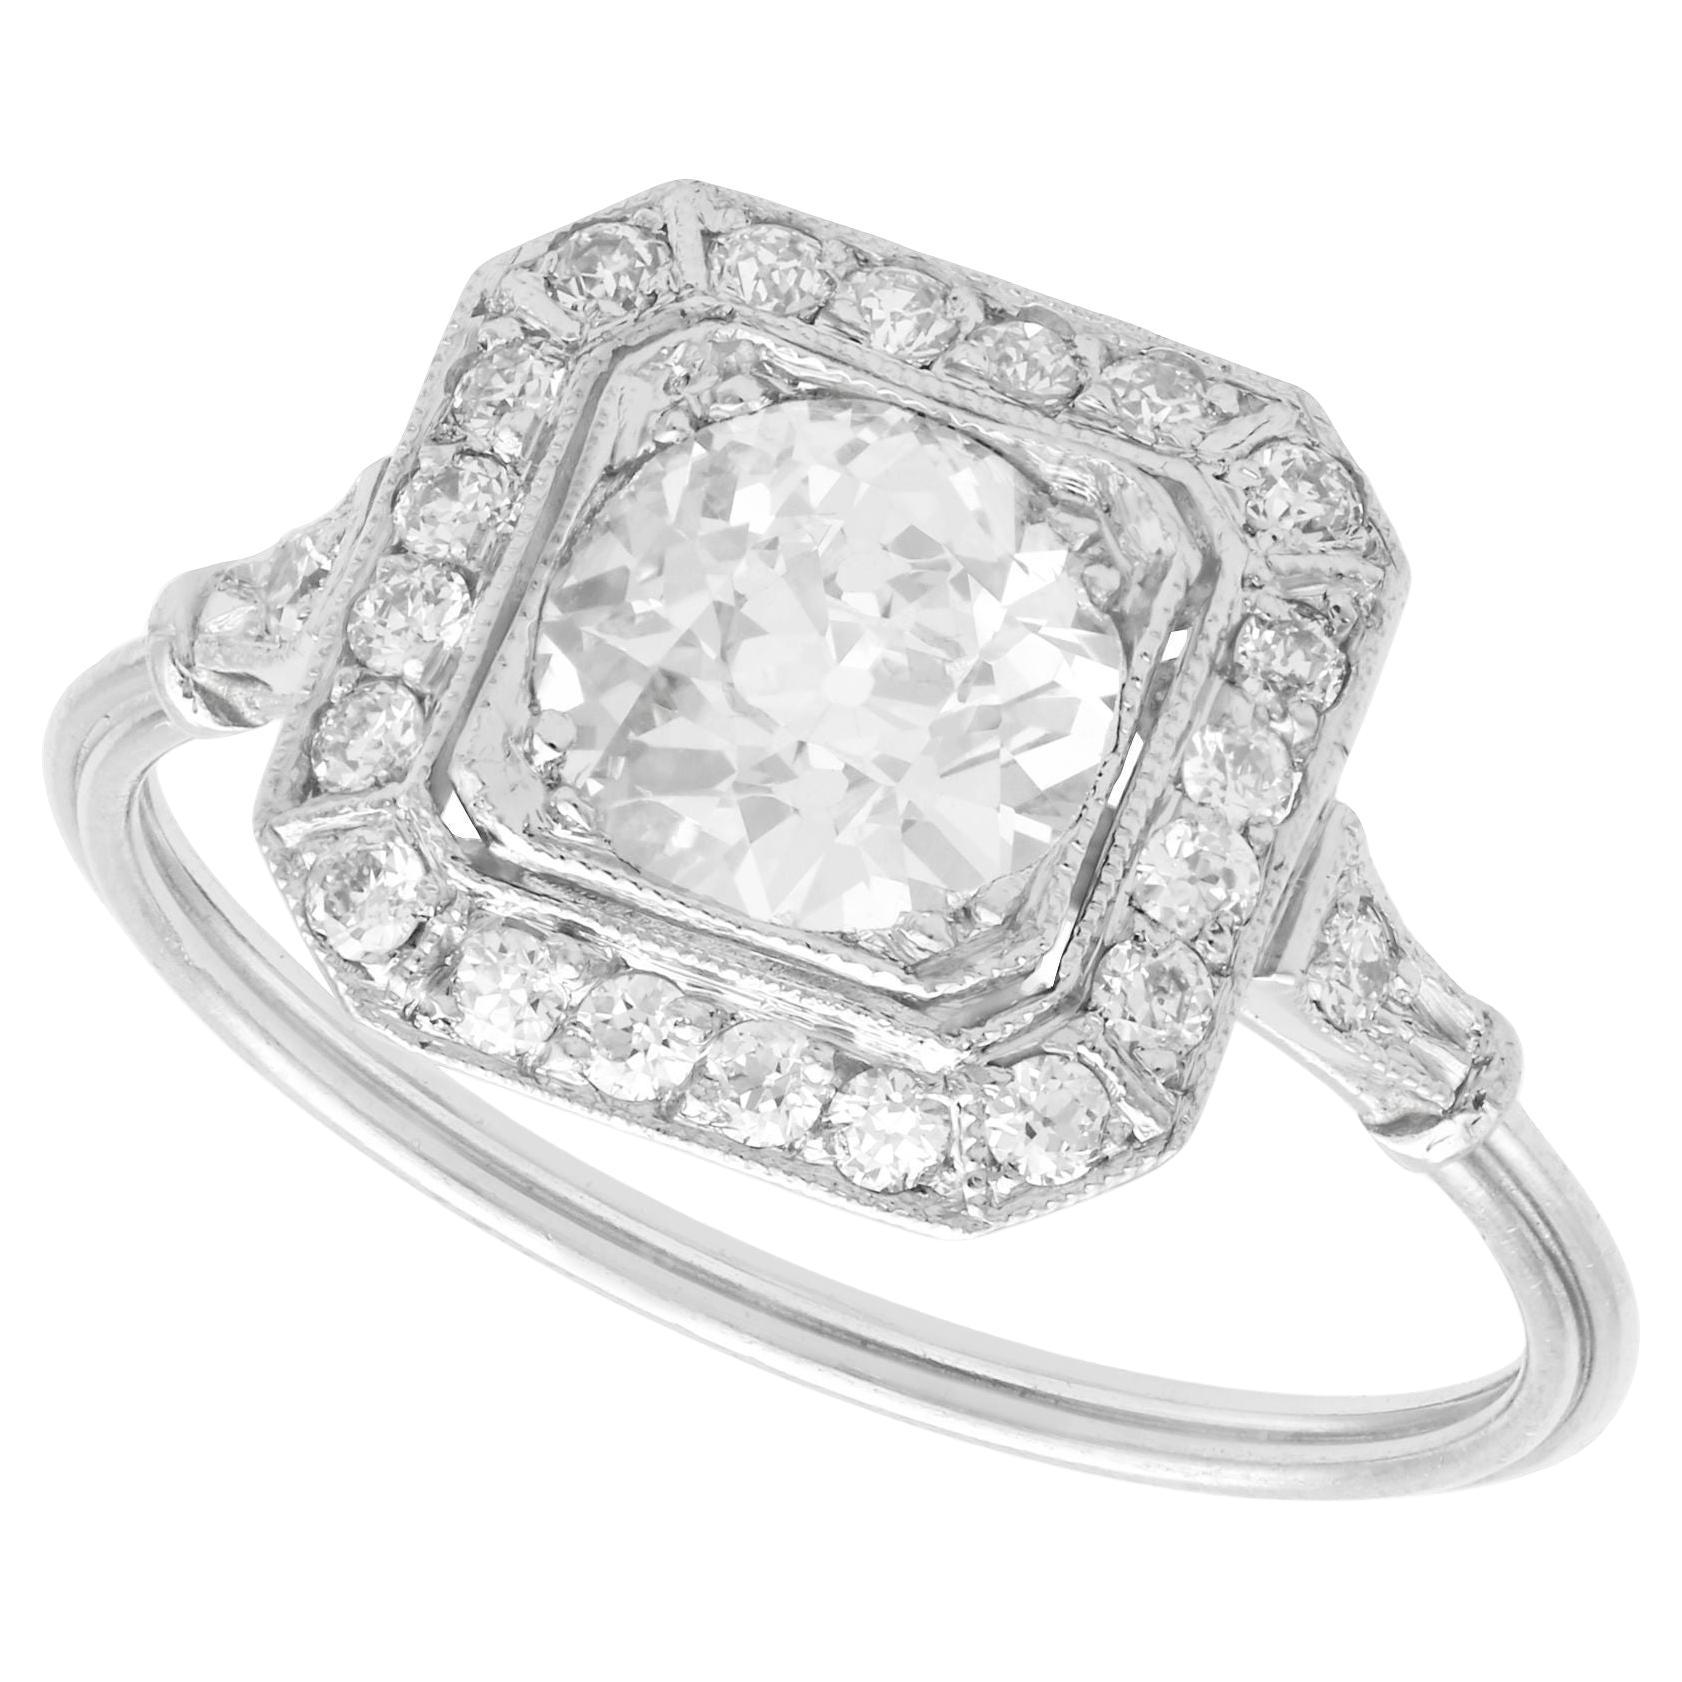 1.37 Carat Diamond and Platinum Cocktail Ring For Sale